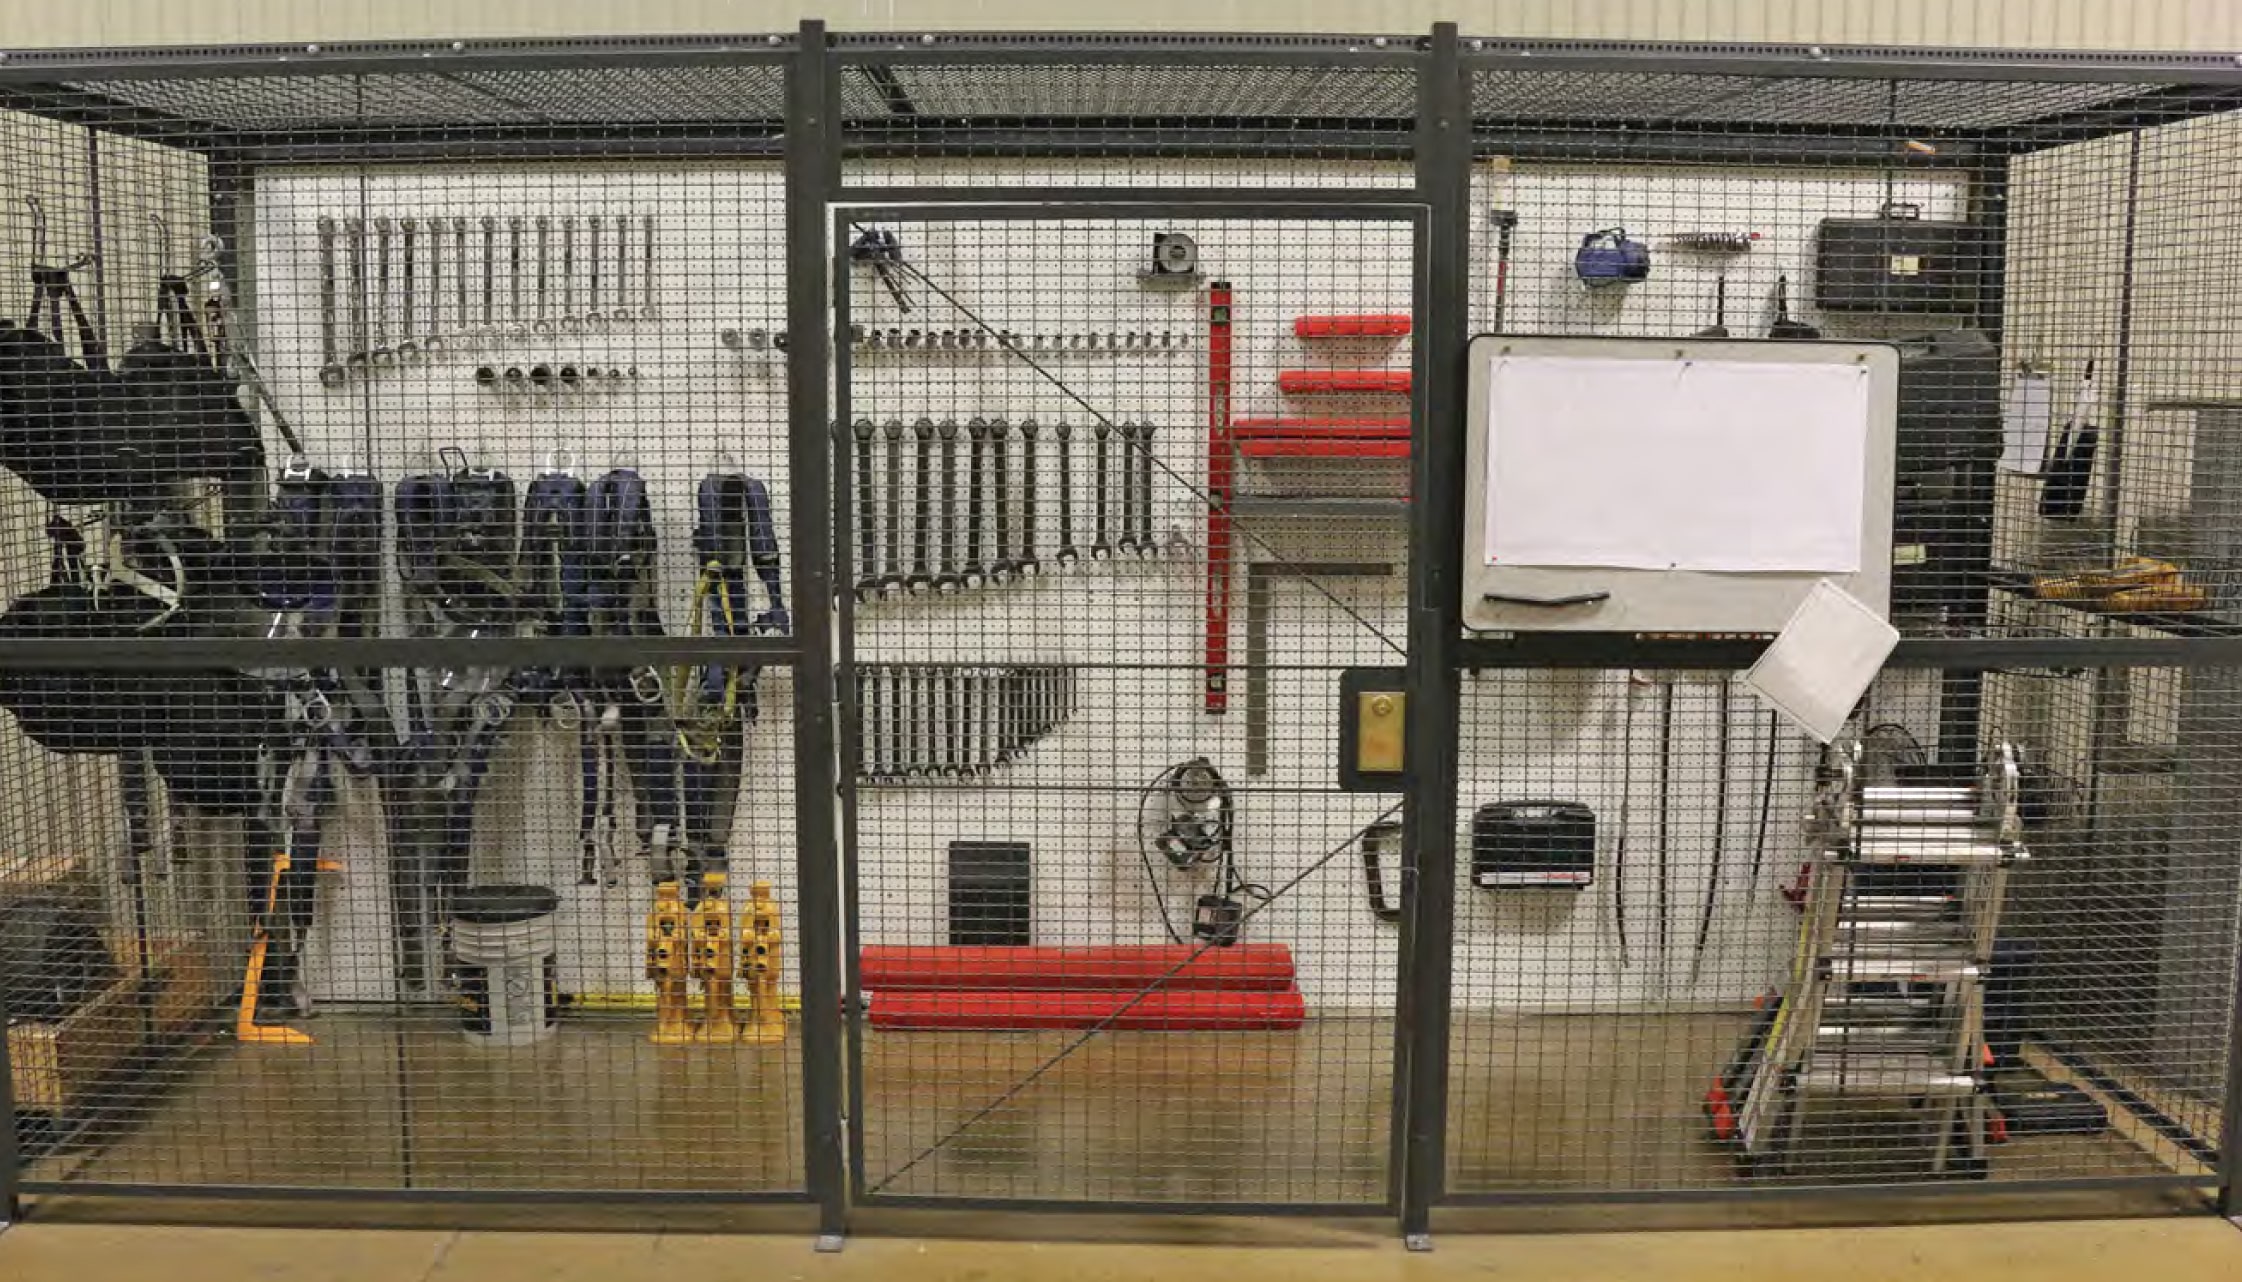 Tools inside wire cage and partition